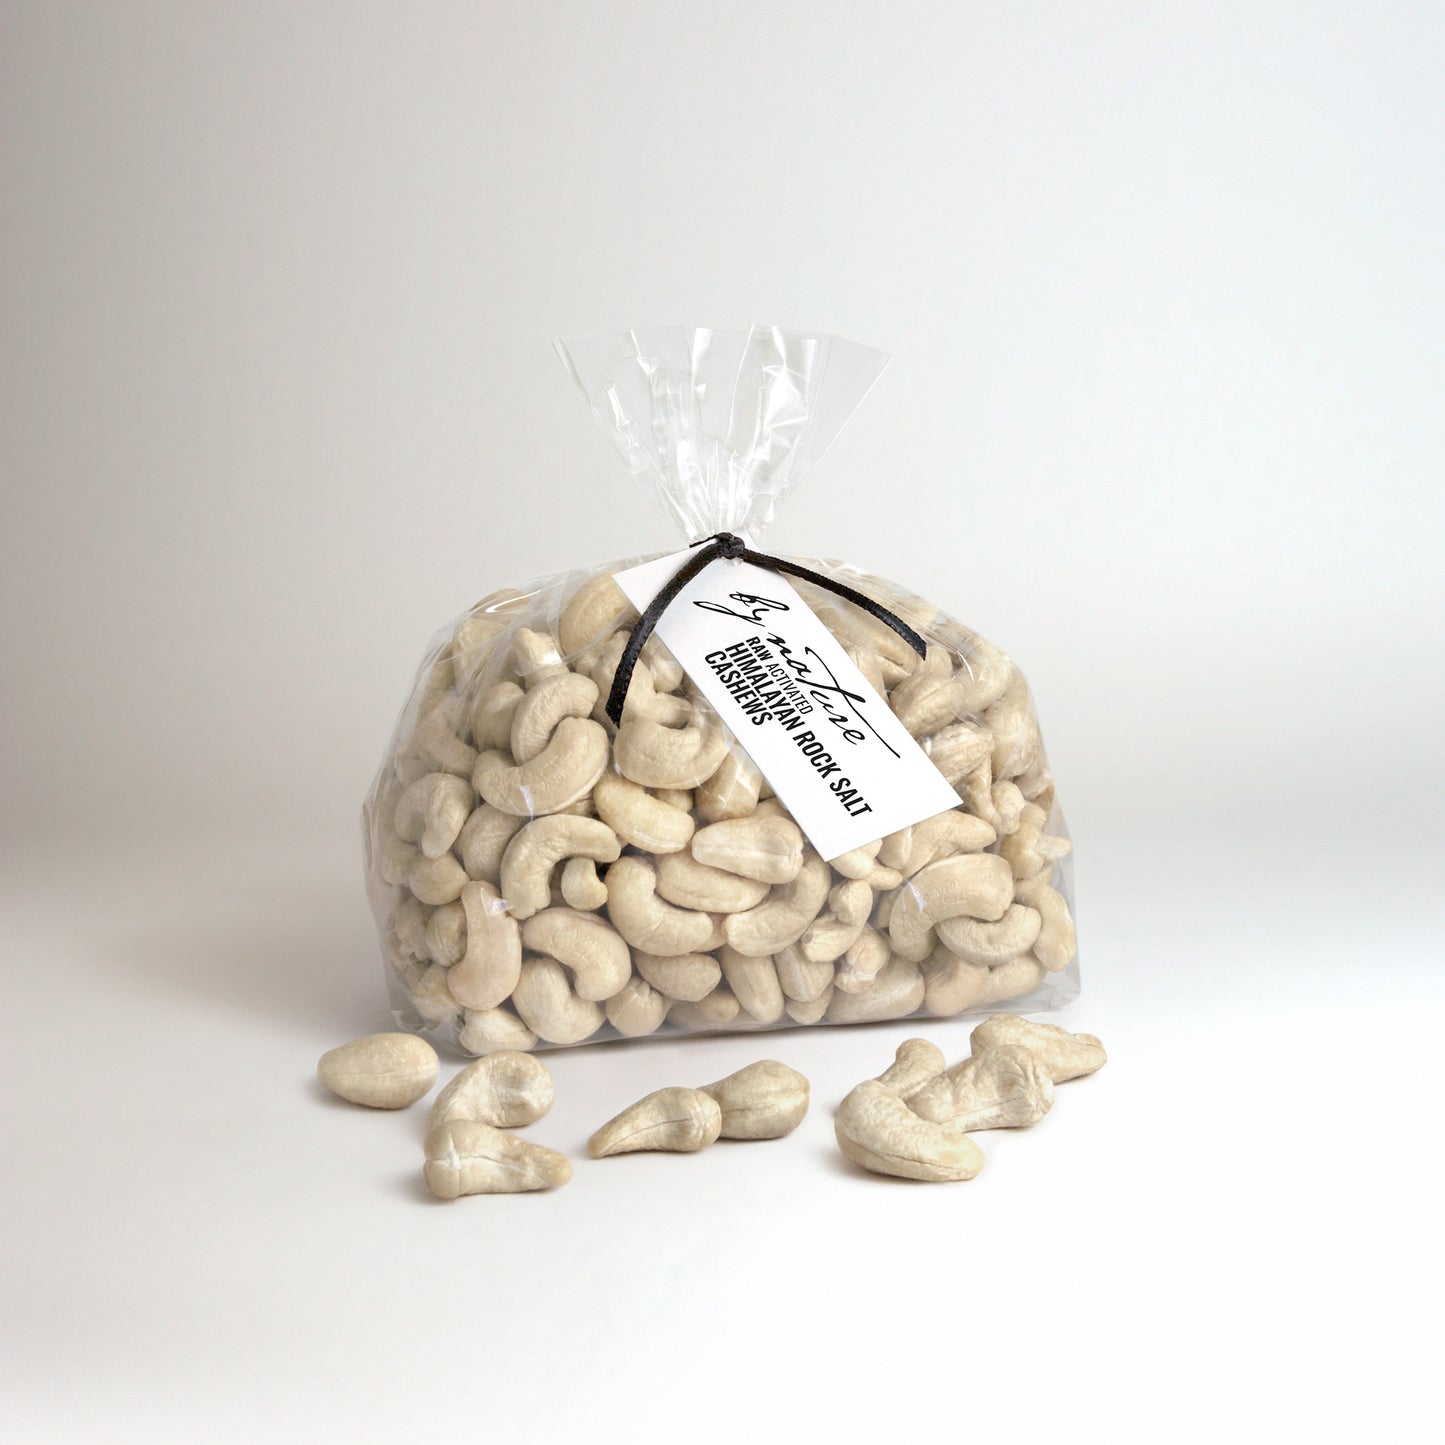 BY NATURE Himalayan Rock Salt Cashews, 500g - raw, activated, dried not roasted.